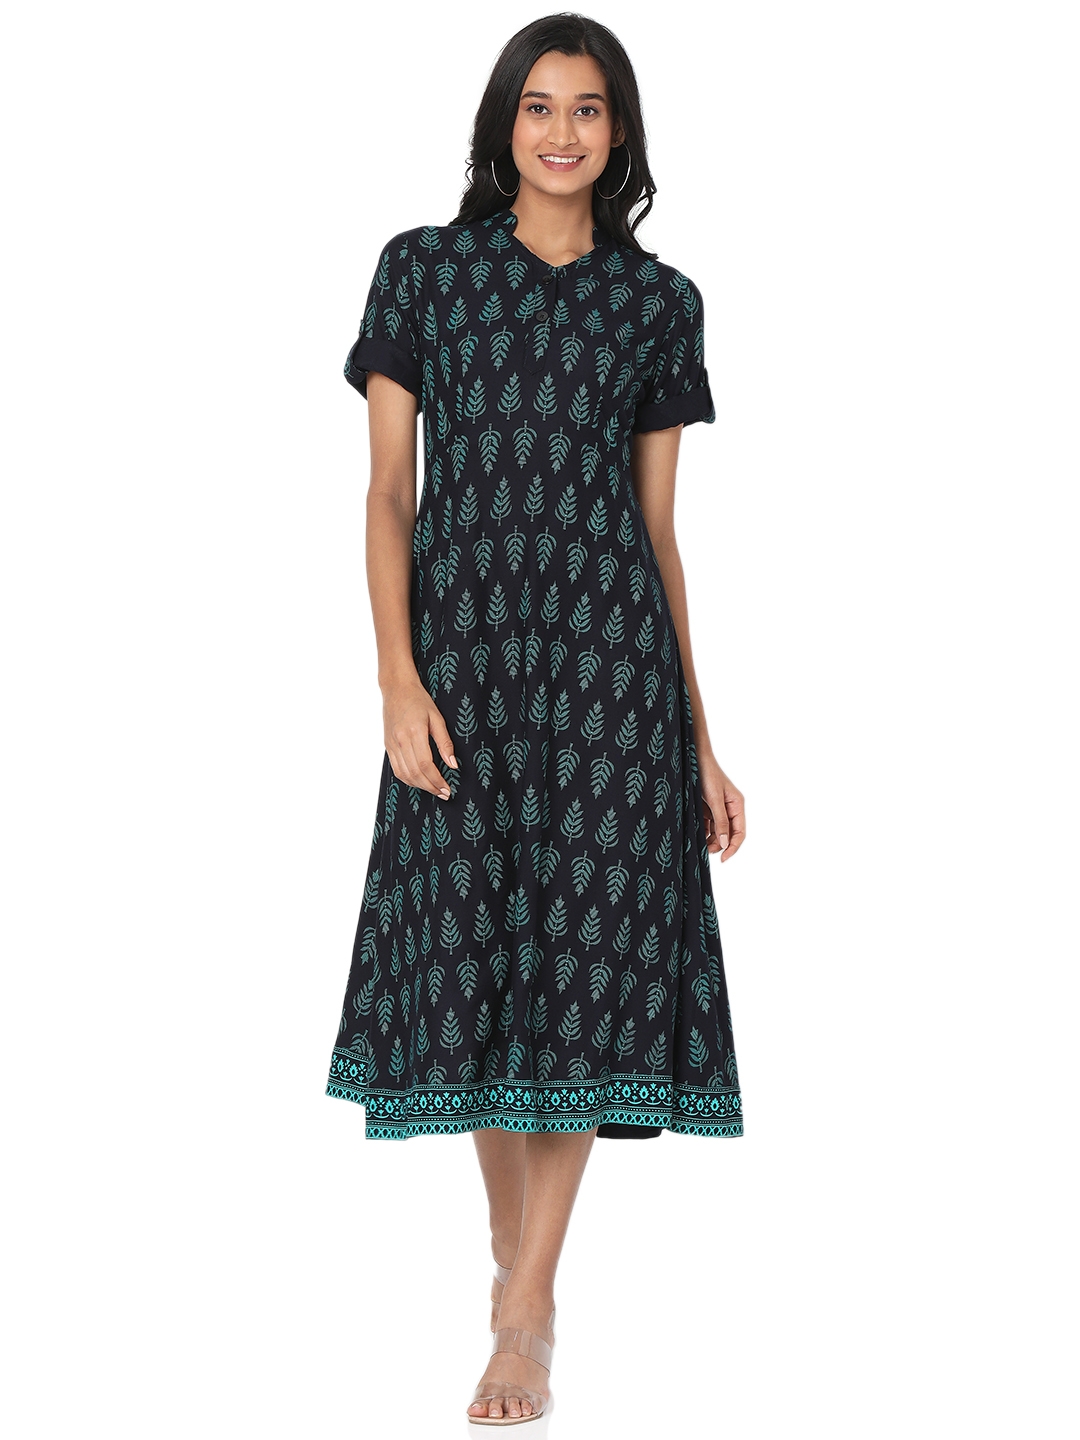 Smarty Pants | Smarty Pants women's cotton fabric green color alpine tree printed dress. 0